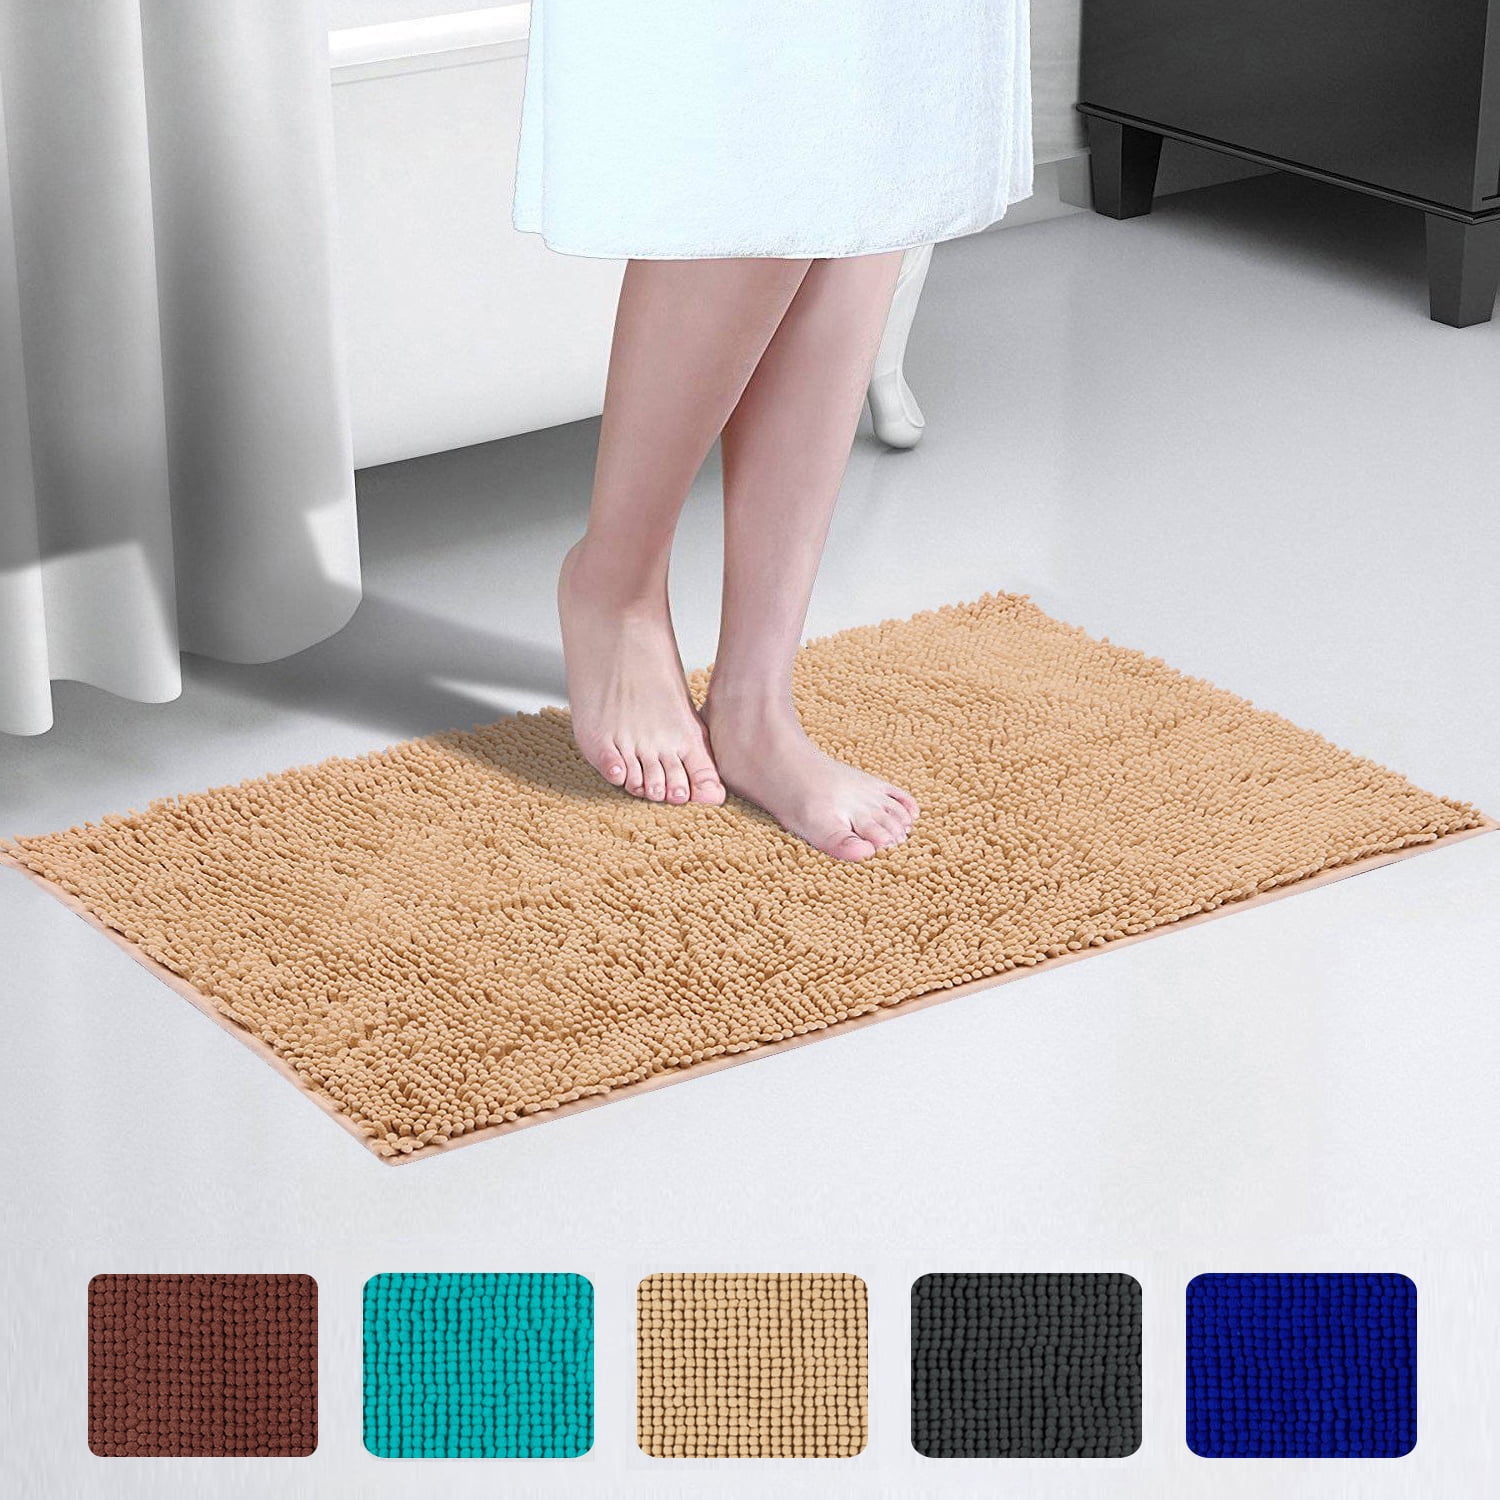 Large Bathroom Rug Non Slip Bath Mat (47x17 Inch Brown) Water Absorbent  Super Soft Shaggy Chenille Machine Washable Dry Extra Thick Perfect  Absorbant Best Plush Carpet for Shower Floor 